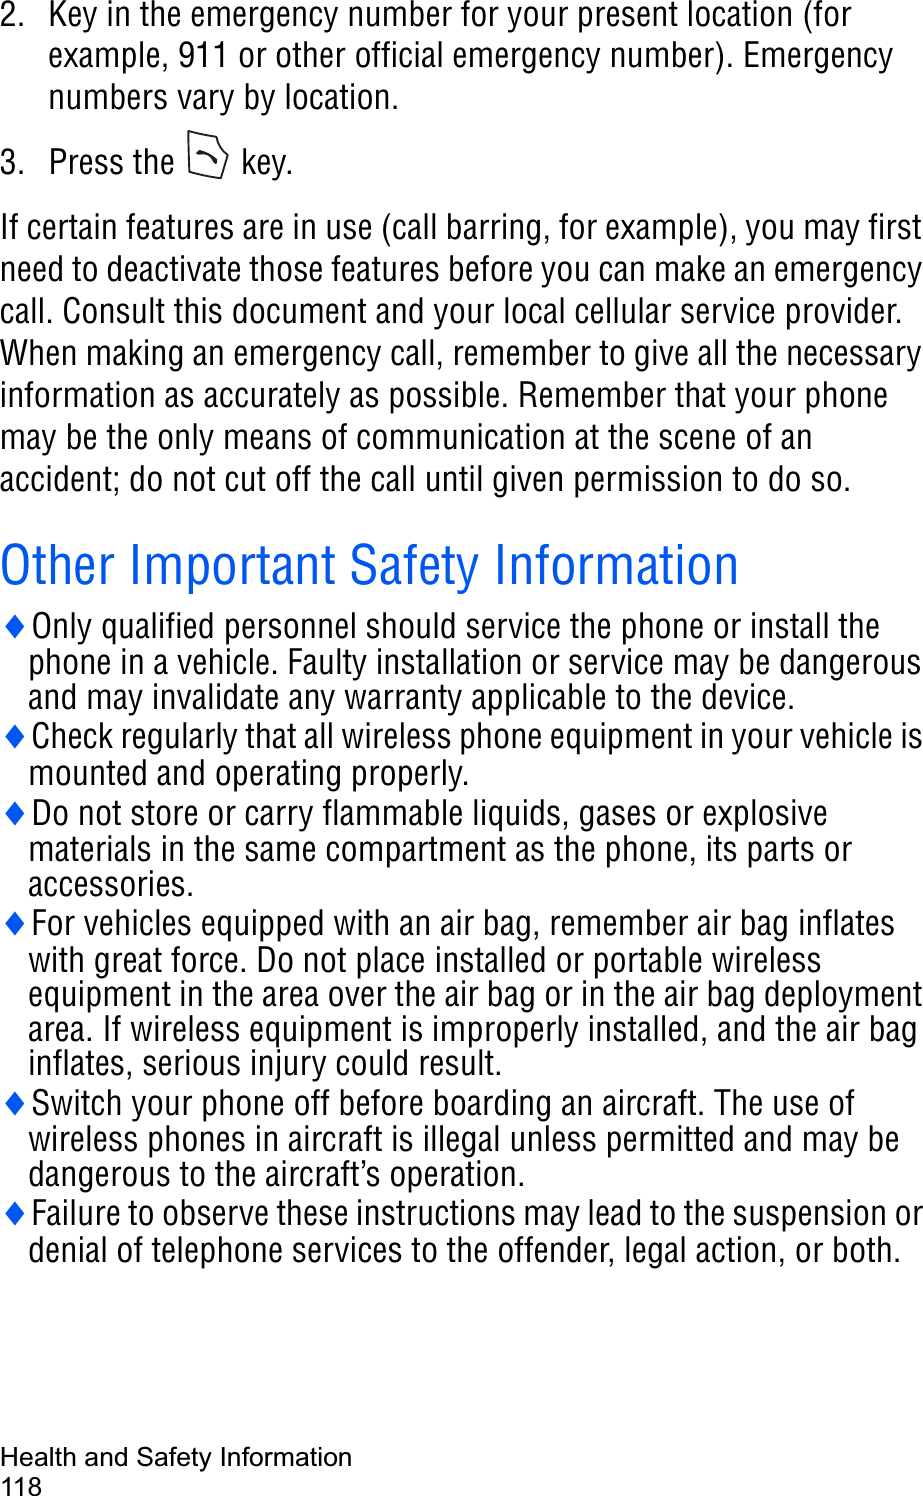 Health and Safety Information1182. Key in the emergency number for your present location (for example, 911 or other official emergency number). Emergency numbers vary by location.3. Press the   key.If certain features are in use (call barring, for example), you may first need to deactivate those features before you can make an emergency call. Consult this document and your local cellular service provider.When making an emergency call, remember to give all the necessary information as accurately as possible. Remember that your phone may be the only means of communication at the scene of an accident; do not cut off the call until given permission to do so.Other Important Safety InformationiOnly qualified personnel should service the phone or install the phone in a vehicle. Faulty installation or service may be dangerous and may invalidate any warranty applicable to the device.iCheck regularly that all wireless phone equipment in your vehicle is mounted and operating properly.iDo not store or carry flammable liquids, gases or explosive materials in the same compartment as the phone, its parts or accessories.iFor vehicles equipped with an air bag, remember air bag inflates with great force. Do not place installed or portable wireless equipment in the area over the air bag or in the air bag deployment area. If wireless equipment is improperly installed, and the air bag inflates, serious injury could result.iSwitch your phone off before boarding an aircraft. The use of wireless phones in aircraft is illegal unless permitted and may be dangerous to the aircraft’s operation.iFailure to observe these instructions may lead to the suspension or denial of telephone services to the offender, legal action, or both.